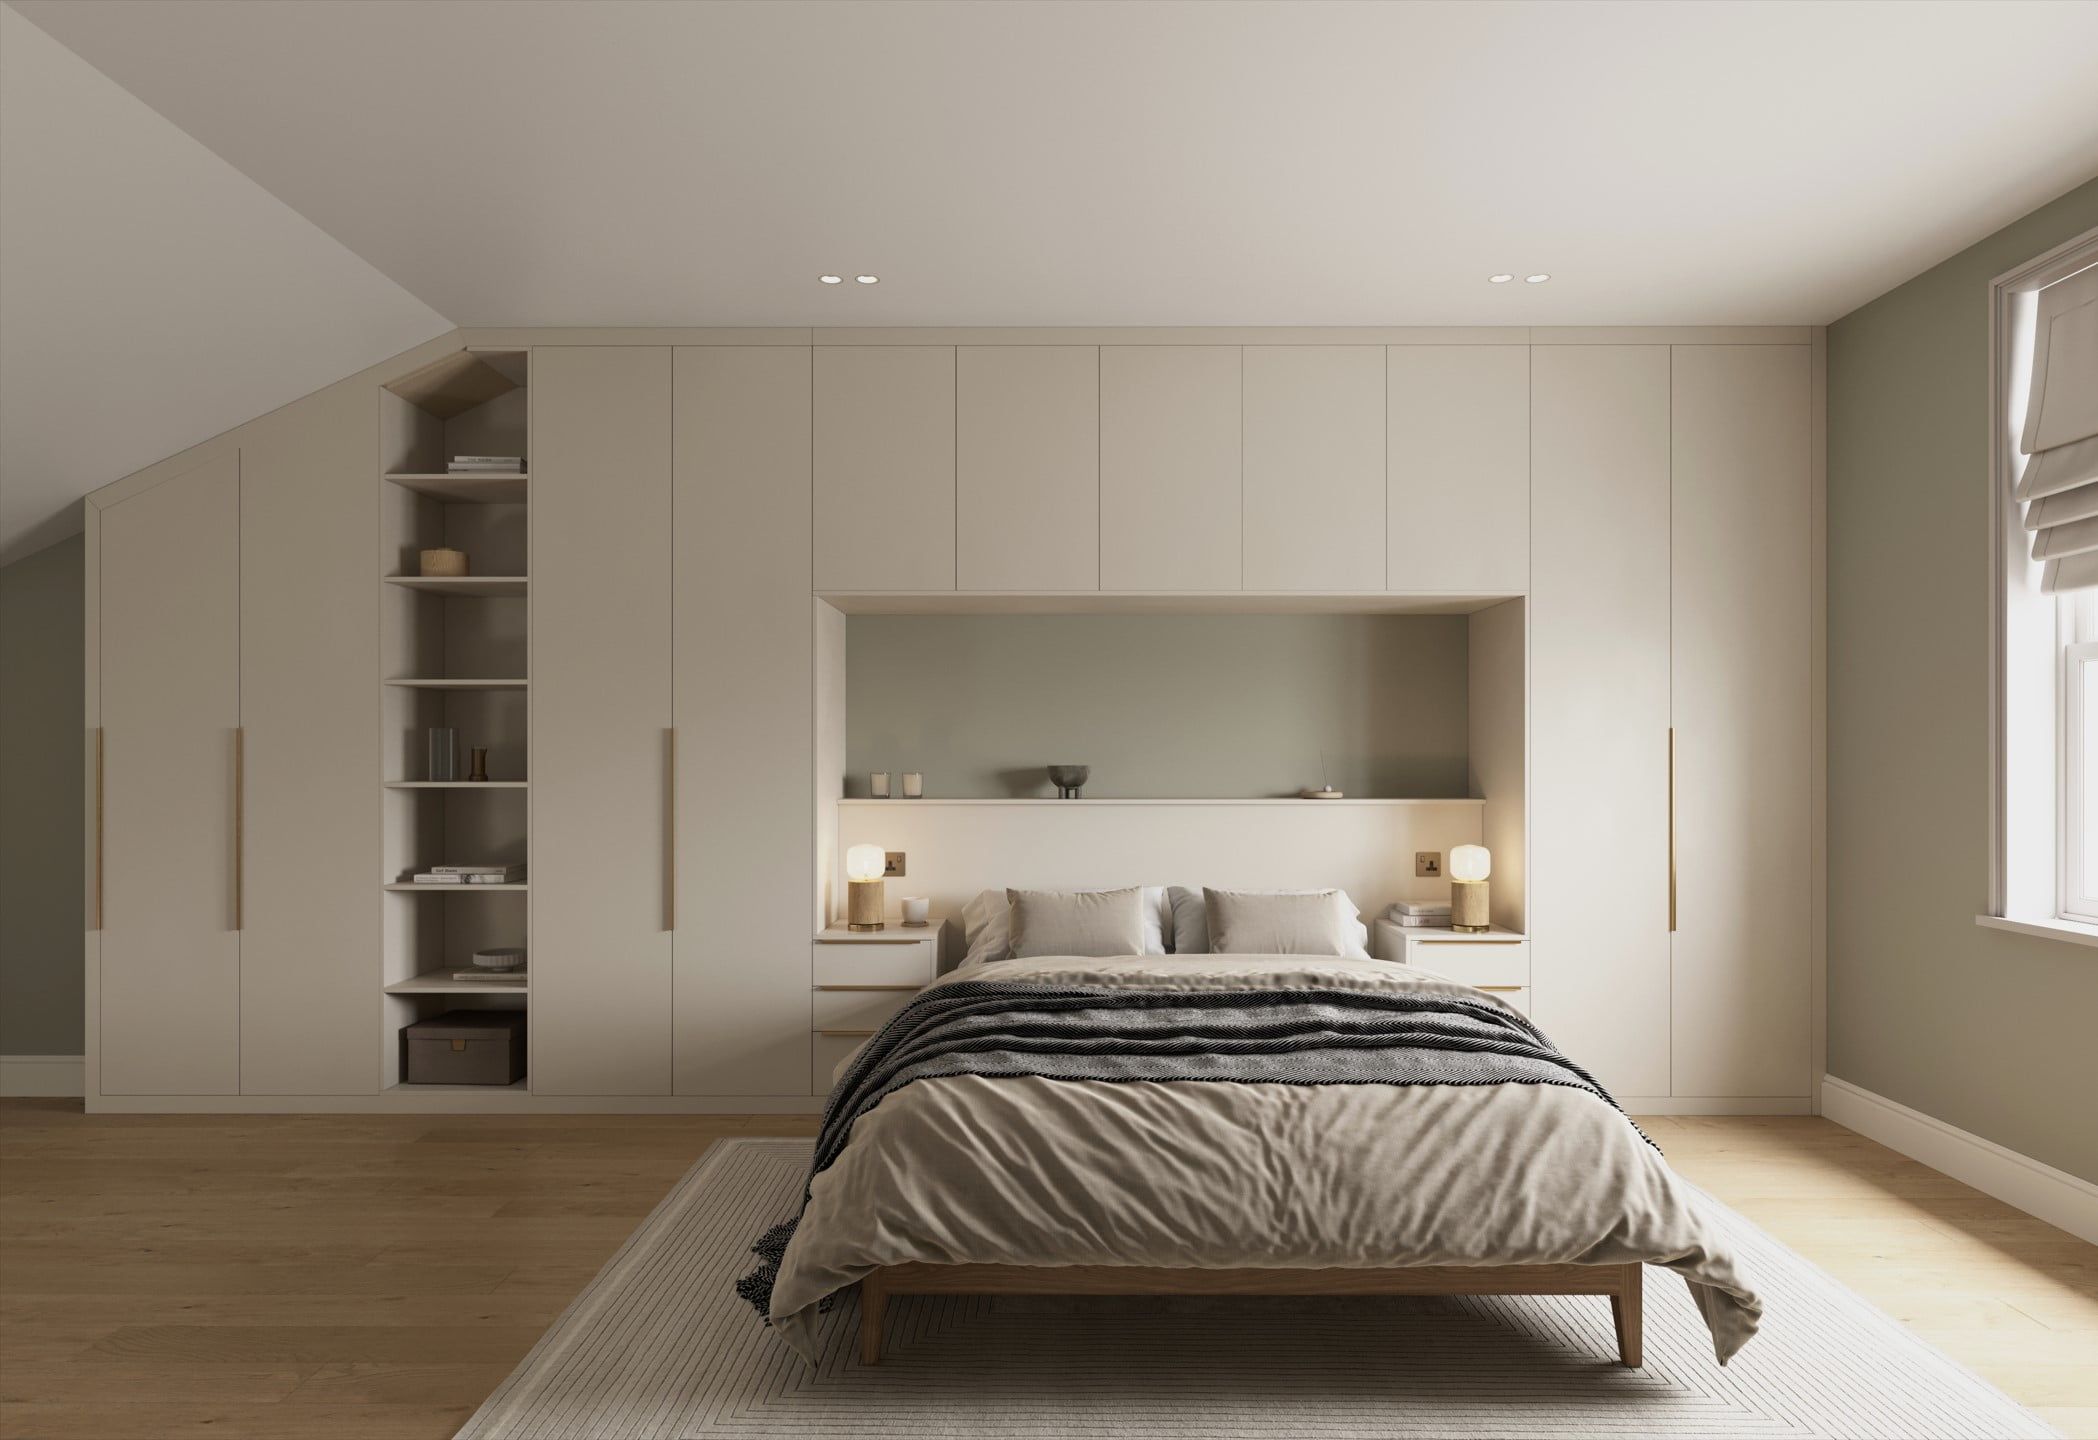 Overbed Fitted Wardrobes And Storage Units, Bespoke Overhead Storage Throughout Overbed Wardrobes (View 10 of 15)